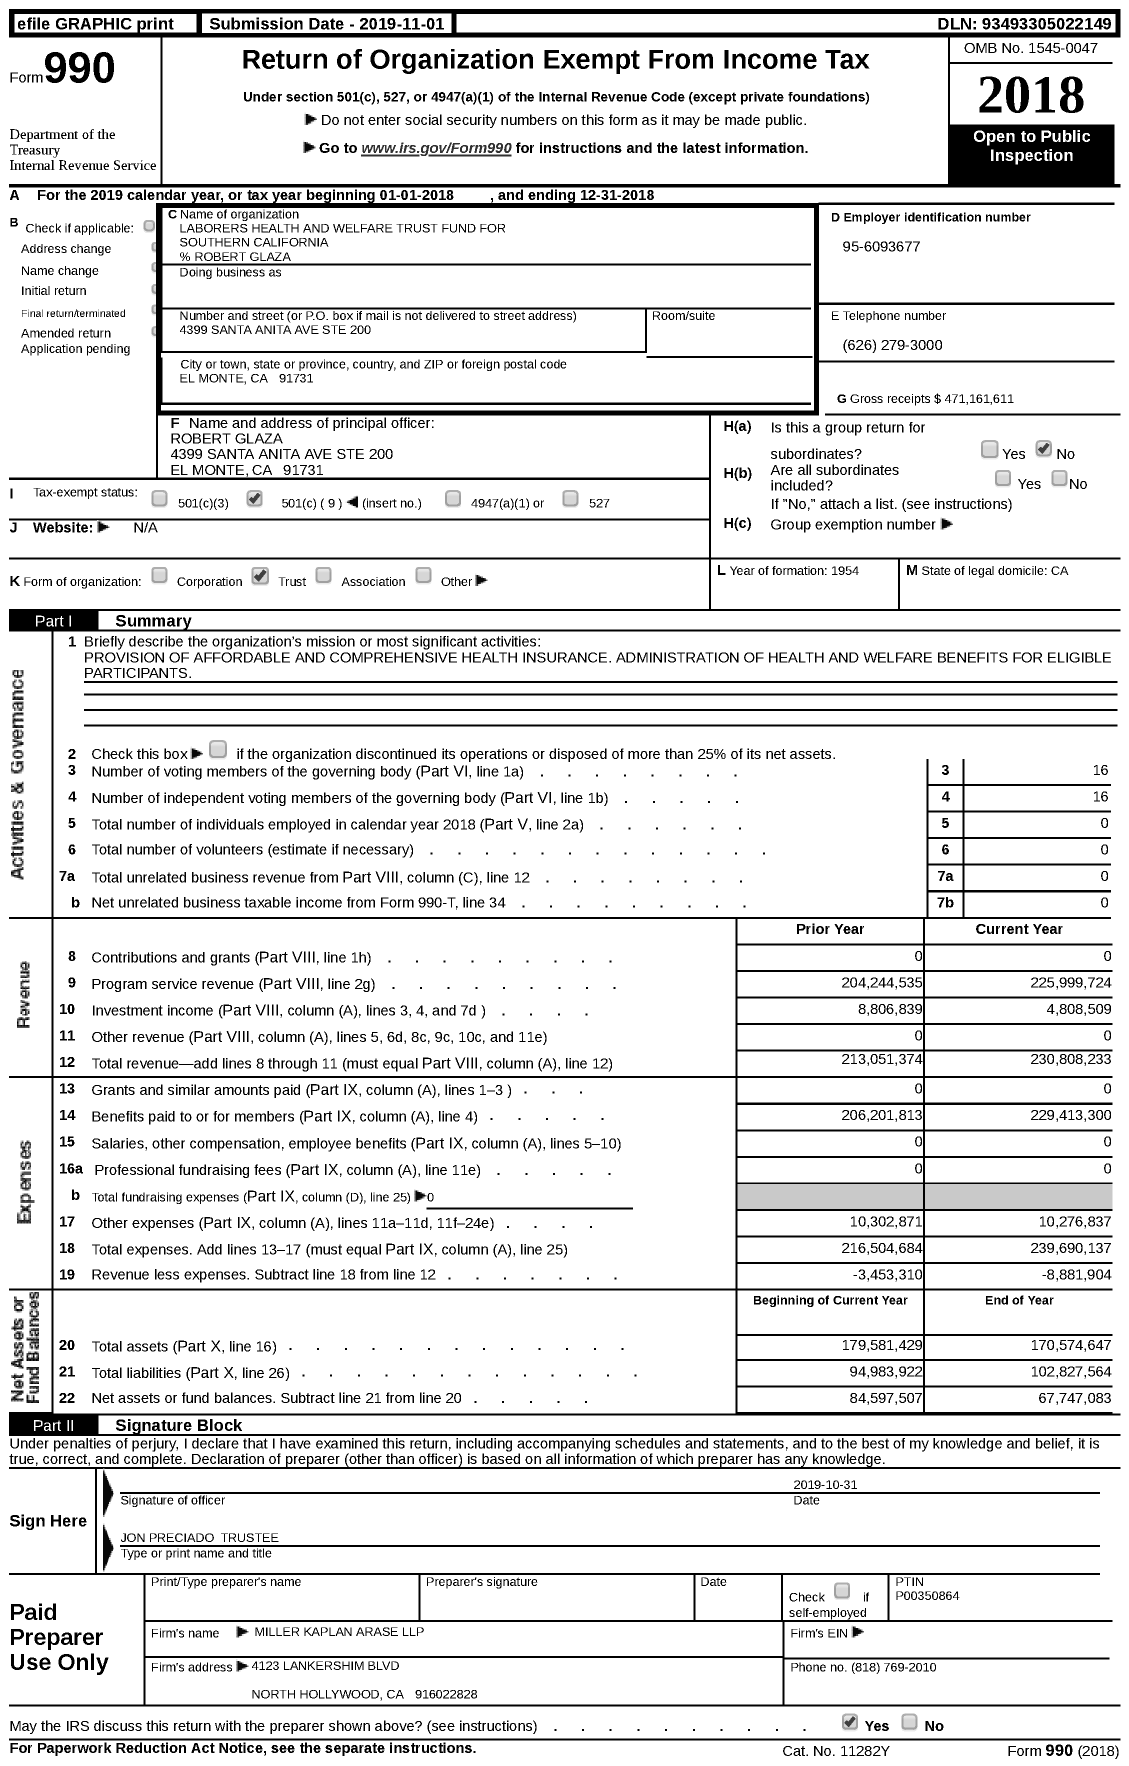 Image of first page of 2018 Form 990 for Laborers Health and Welfare Trust Fund for Southern California